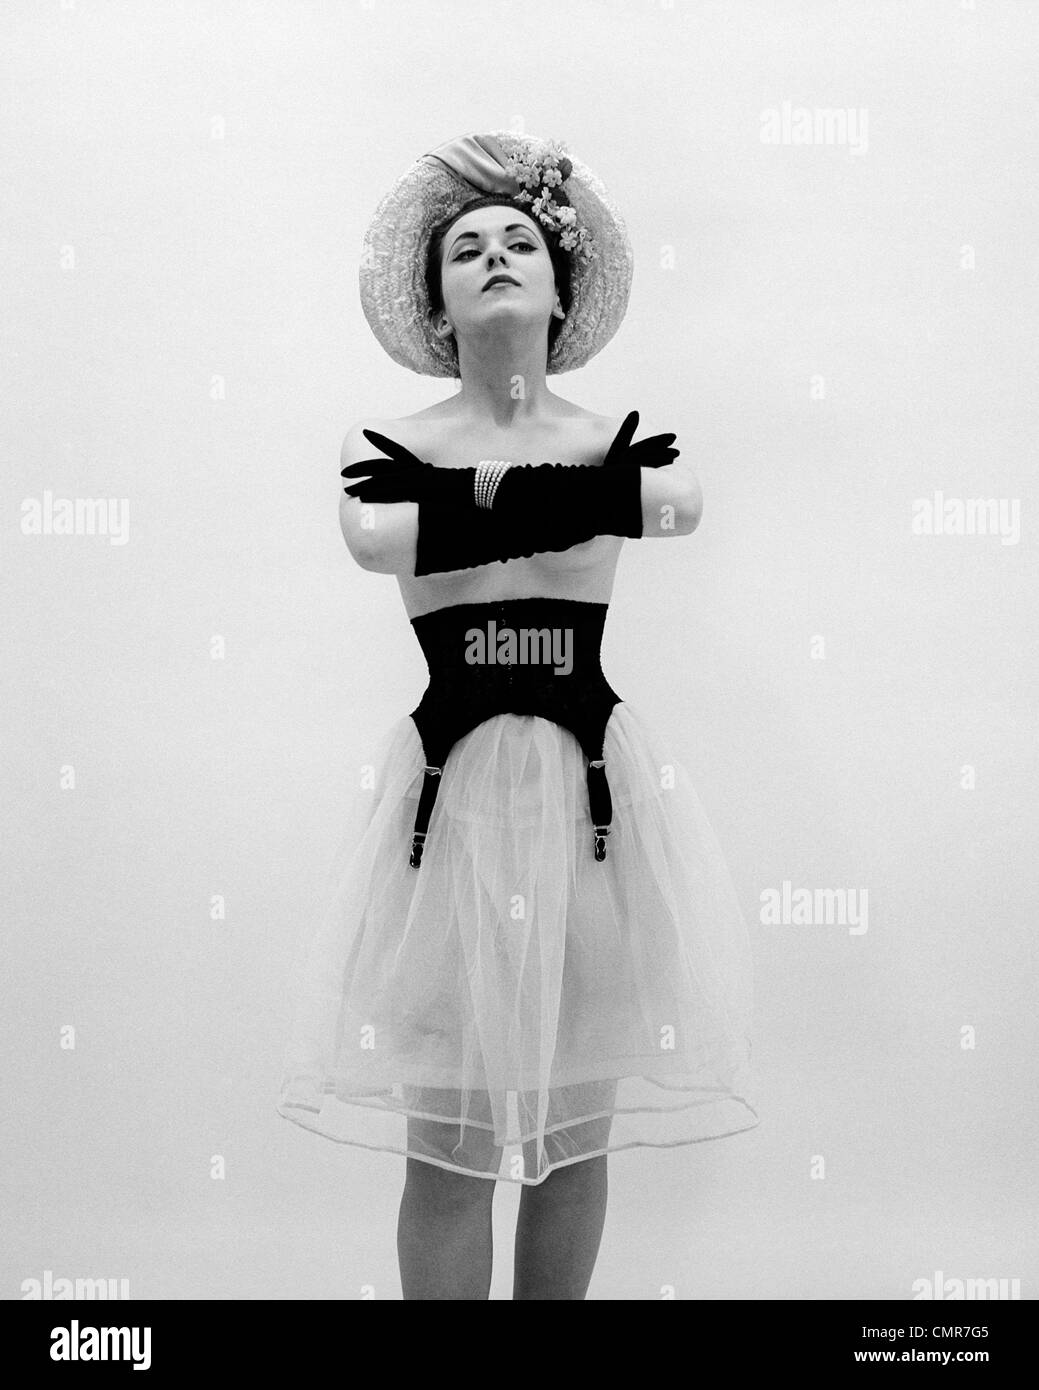 1950s BACK OF TOPLESS WOMAN WEARING HAT AND FULL LENGTH GLOVES PEARL  BRACELET GIRDLE OVER CRINOLINE SKIRT PARASOL BEHIND BACK Stock Photo - Alamy